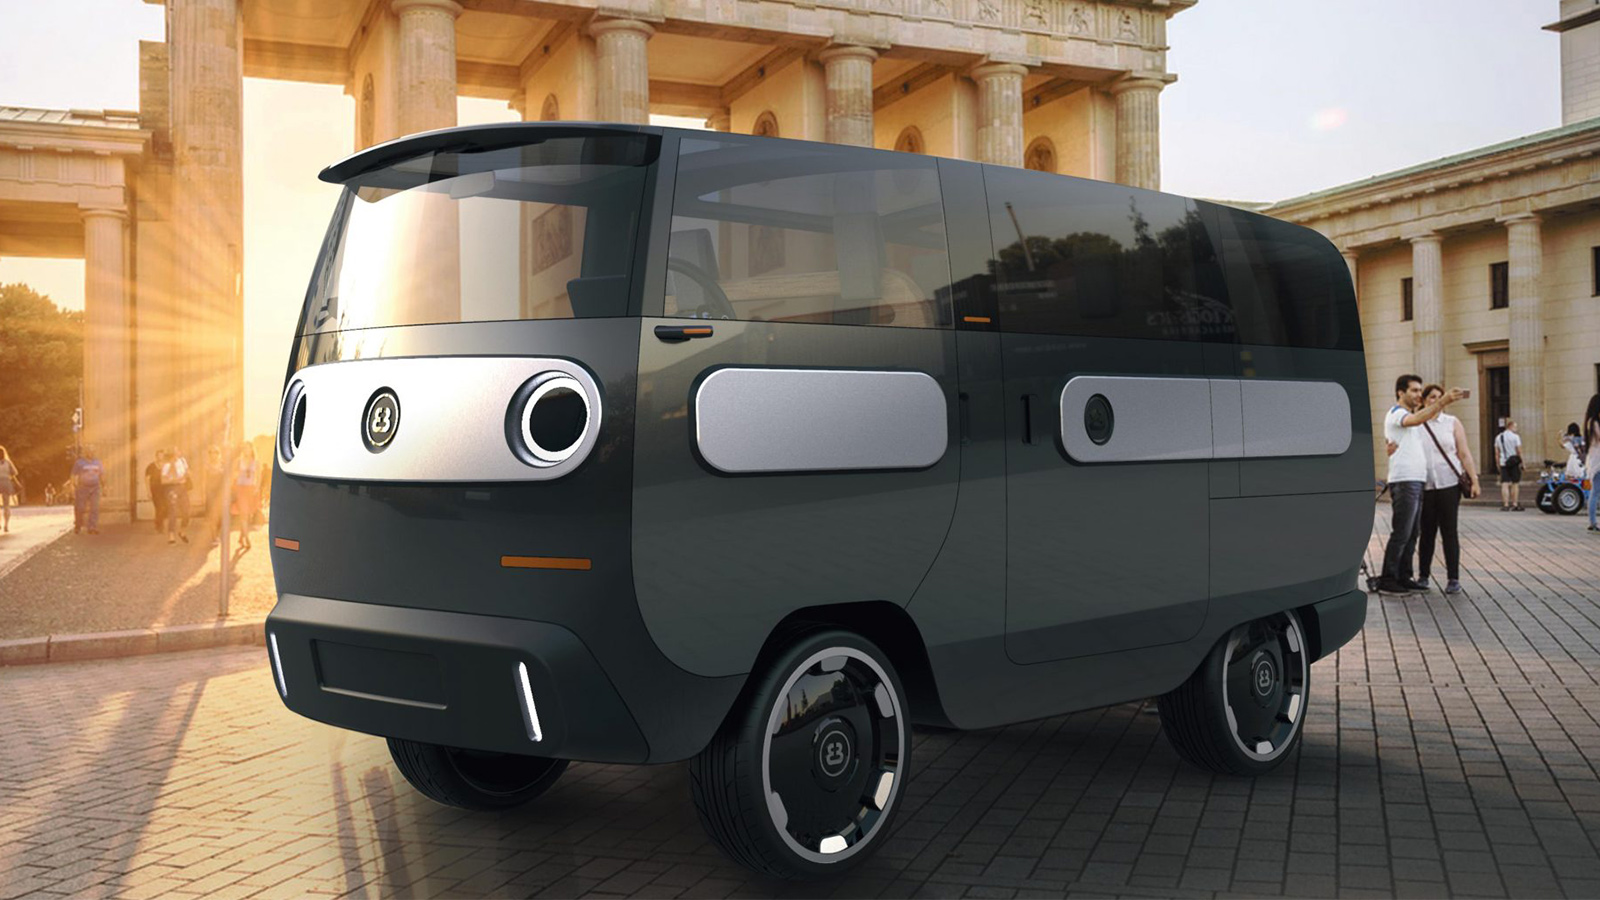 The eBussy Aims to be the Most Innovative Electrical Vehicle in the